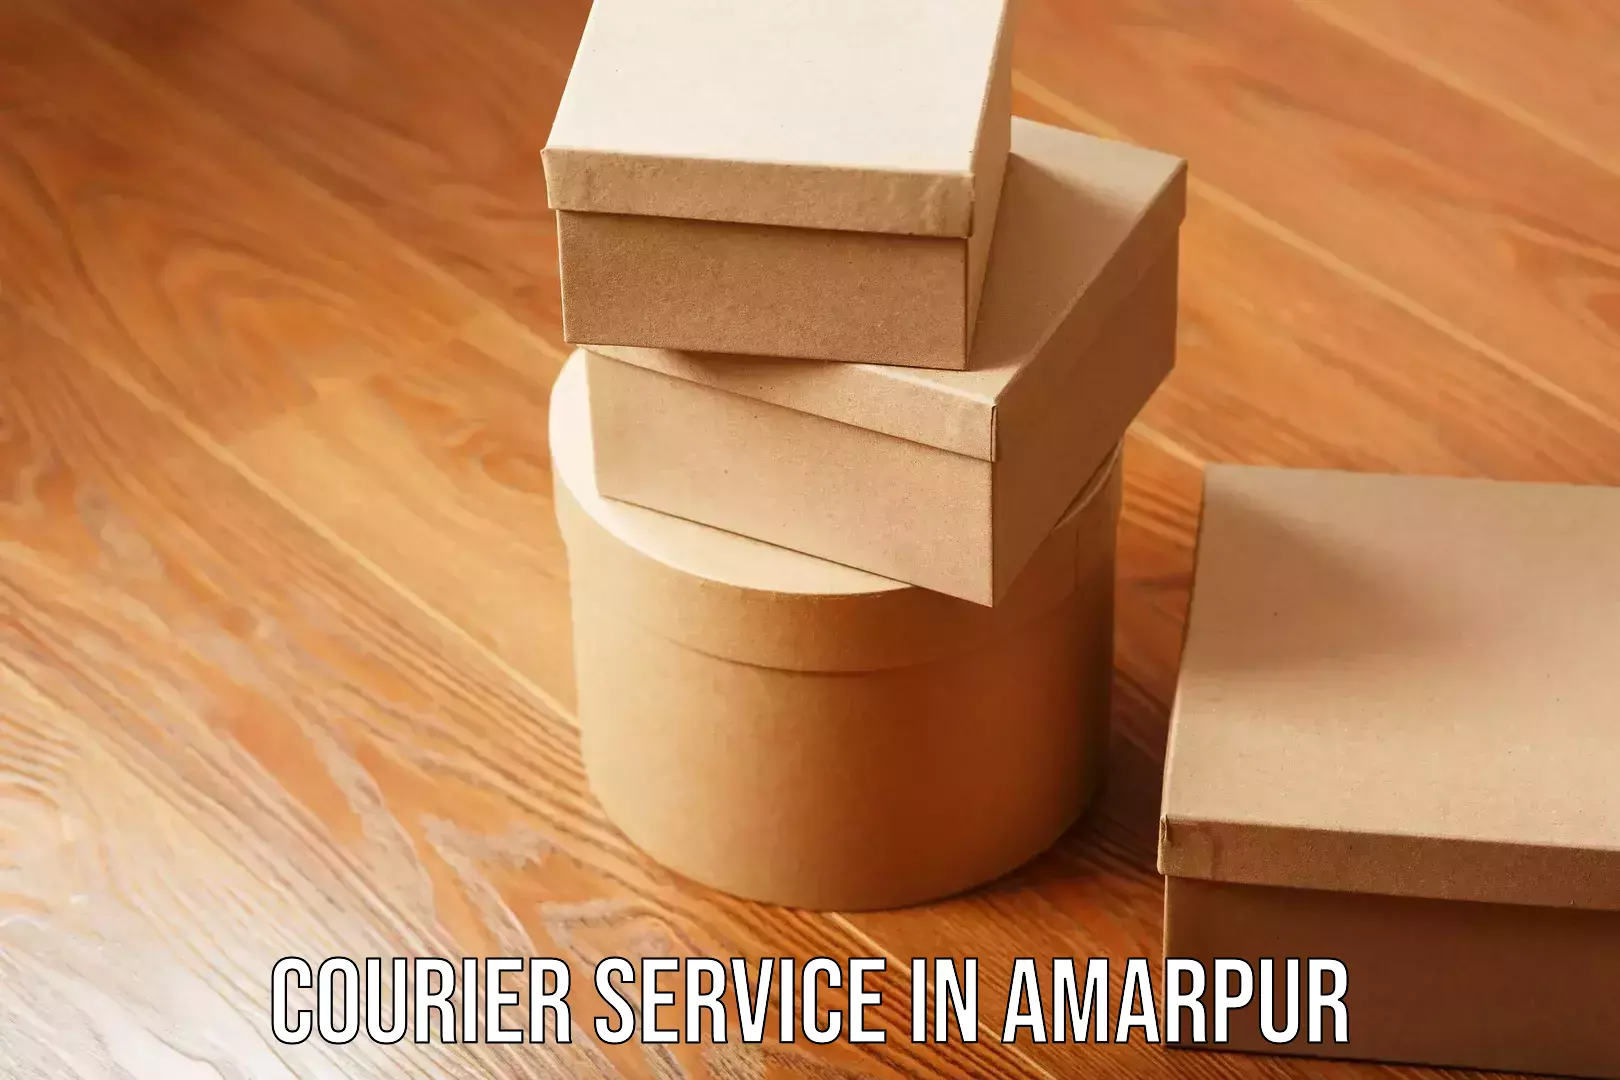 High-capacity shipping options in Amarpur